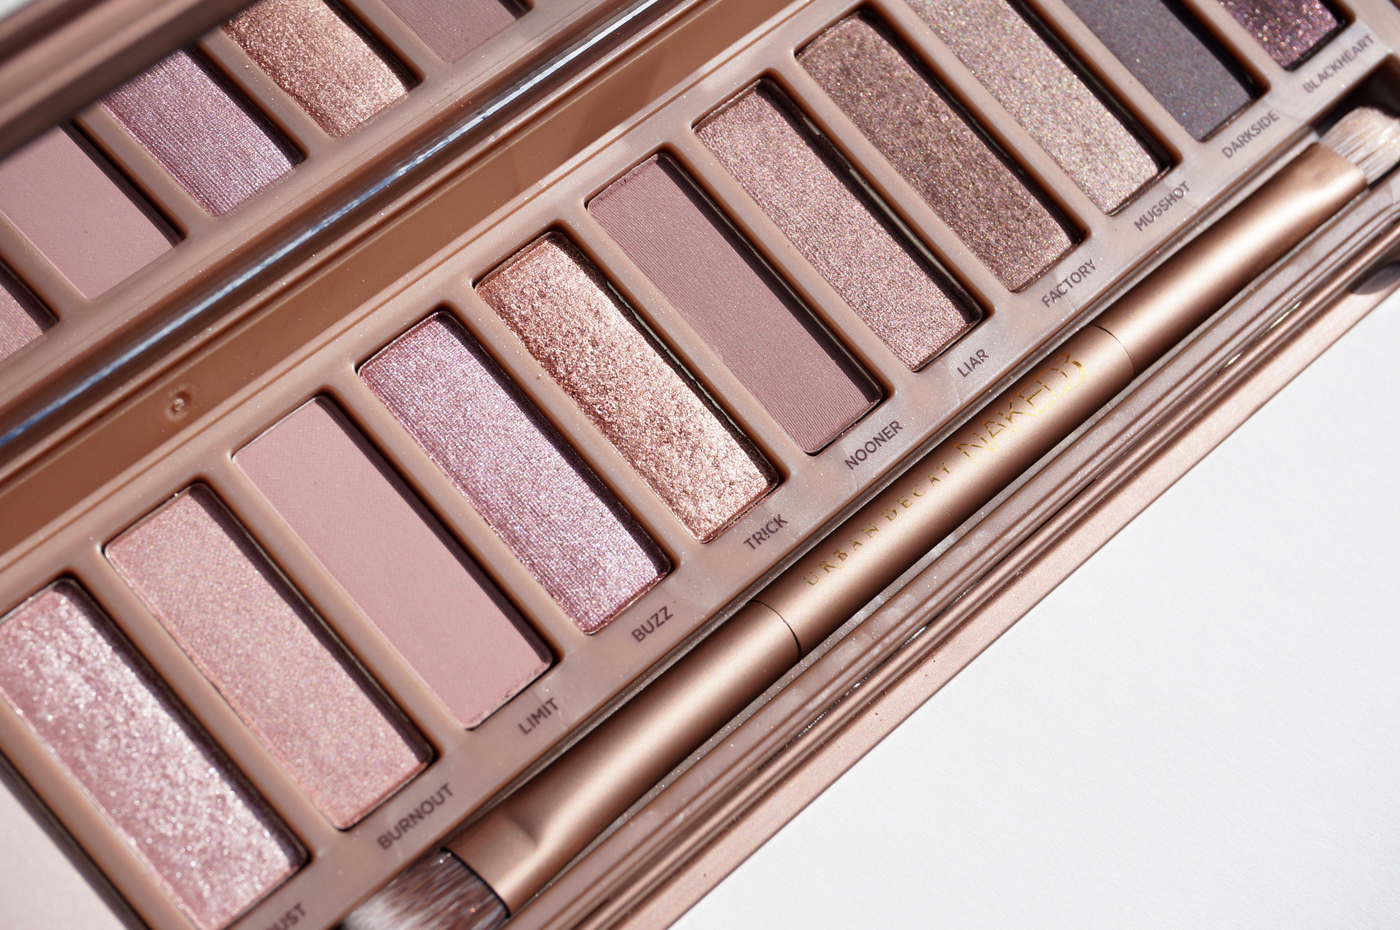 Look & Review: Urban Decay Naked3 Palette - My Eyeshadow 